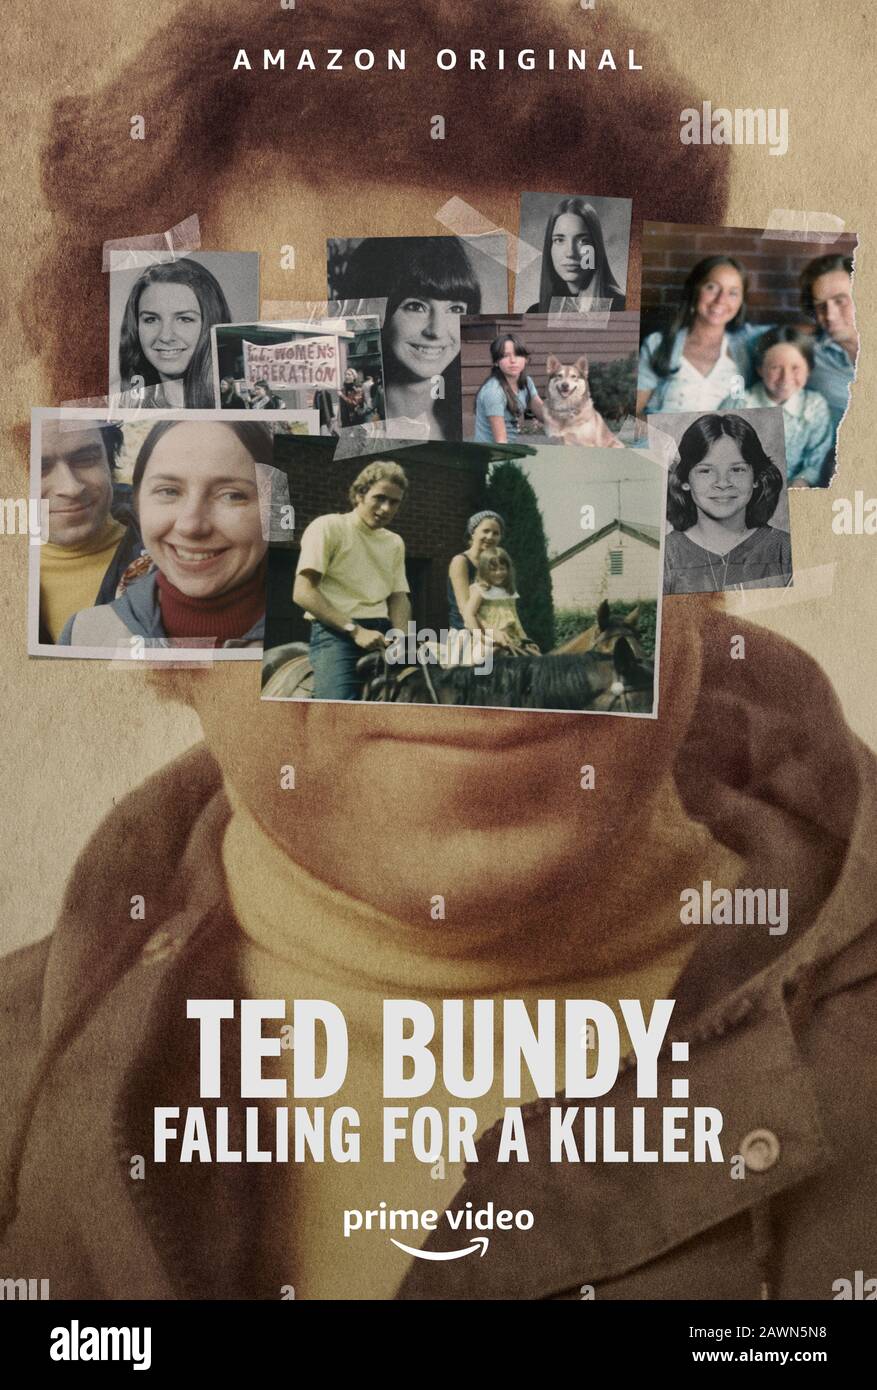 Ted Bundy: Falling for a Killer (2020) directed by  and starring Elizabeth Kendall, Molly Kendall and Steven Winn. After nearly 40 years of silence, Elizabeth Kendall and her daughter Molly share their experiences with unsettling new details about Ted Bundy. Stock Photo